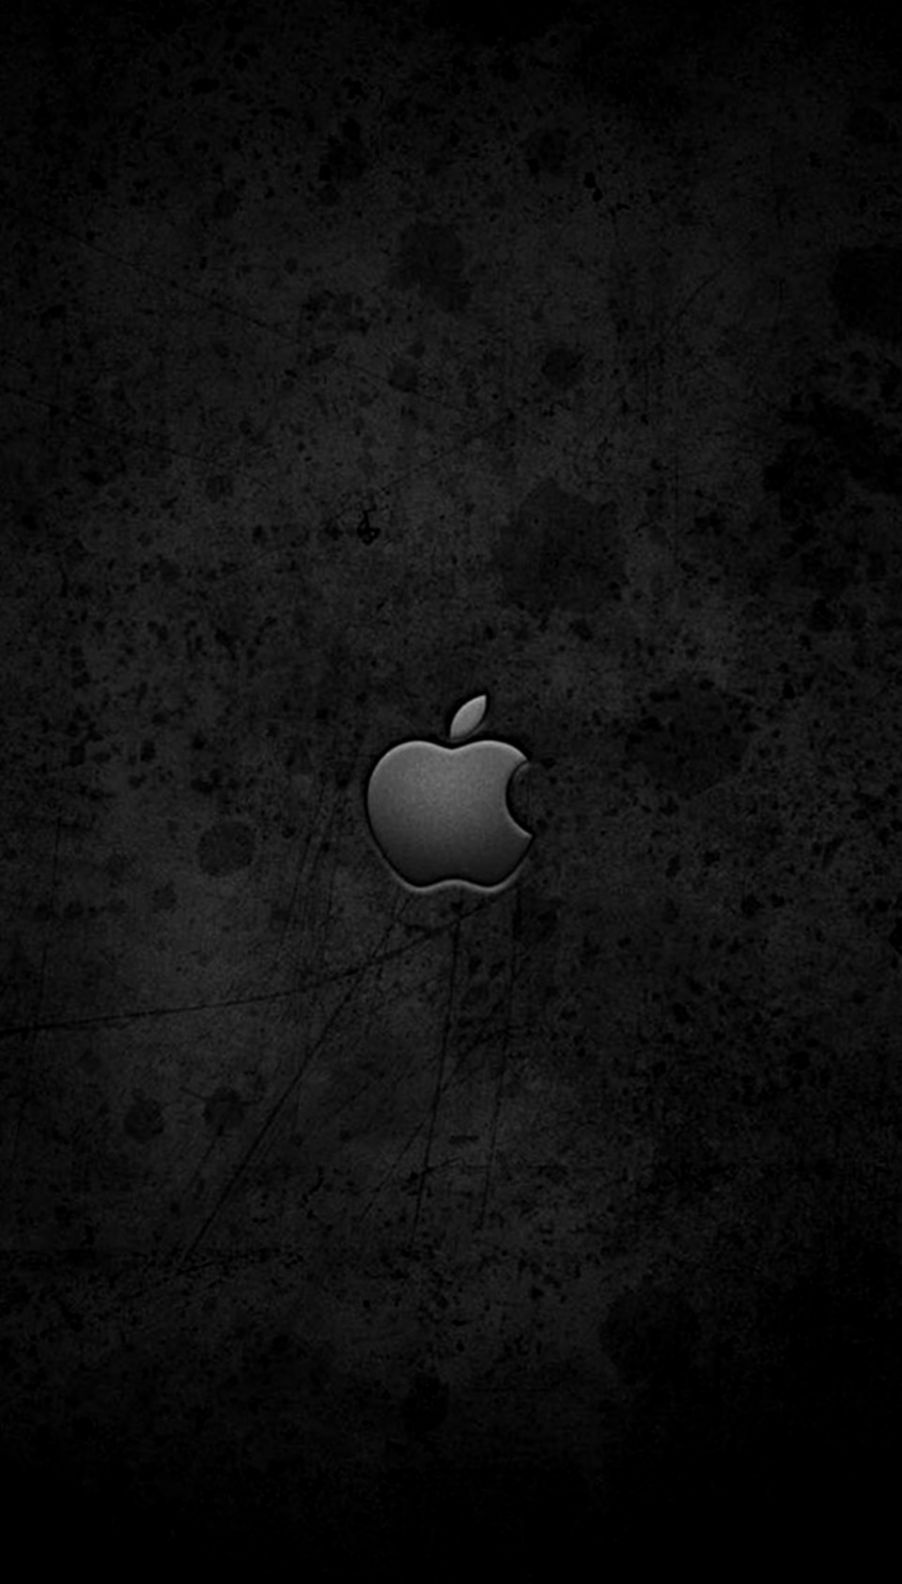 Black Apple Logo Wallpaper For Iphone 6 photos of Iphone Wallpaper 902x1584